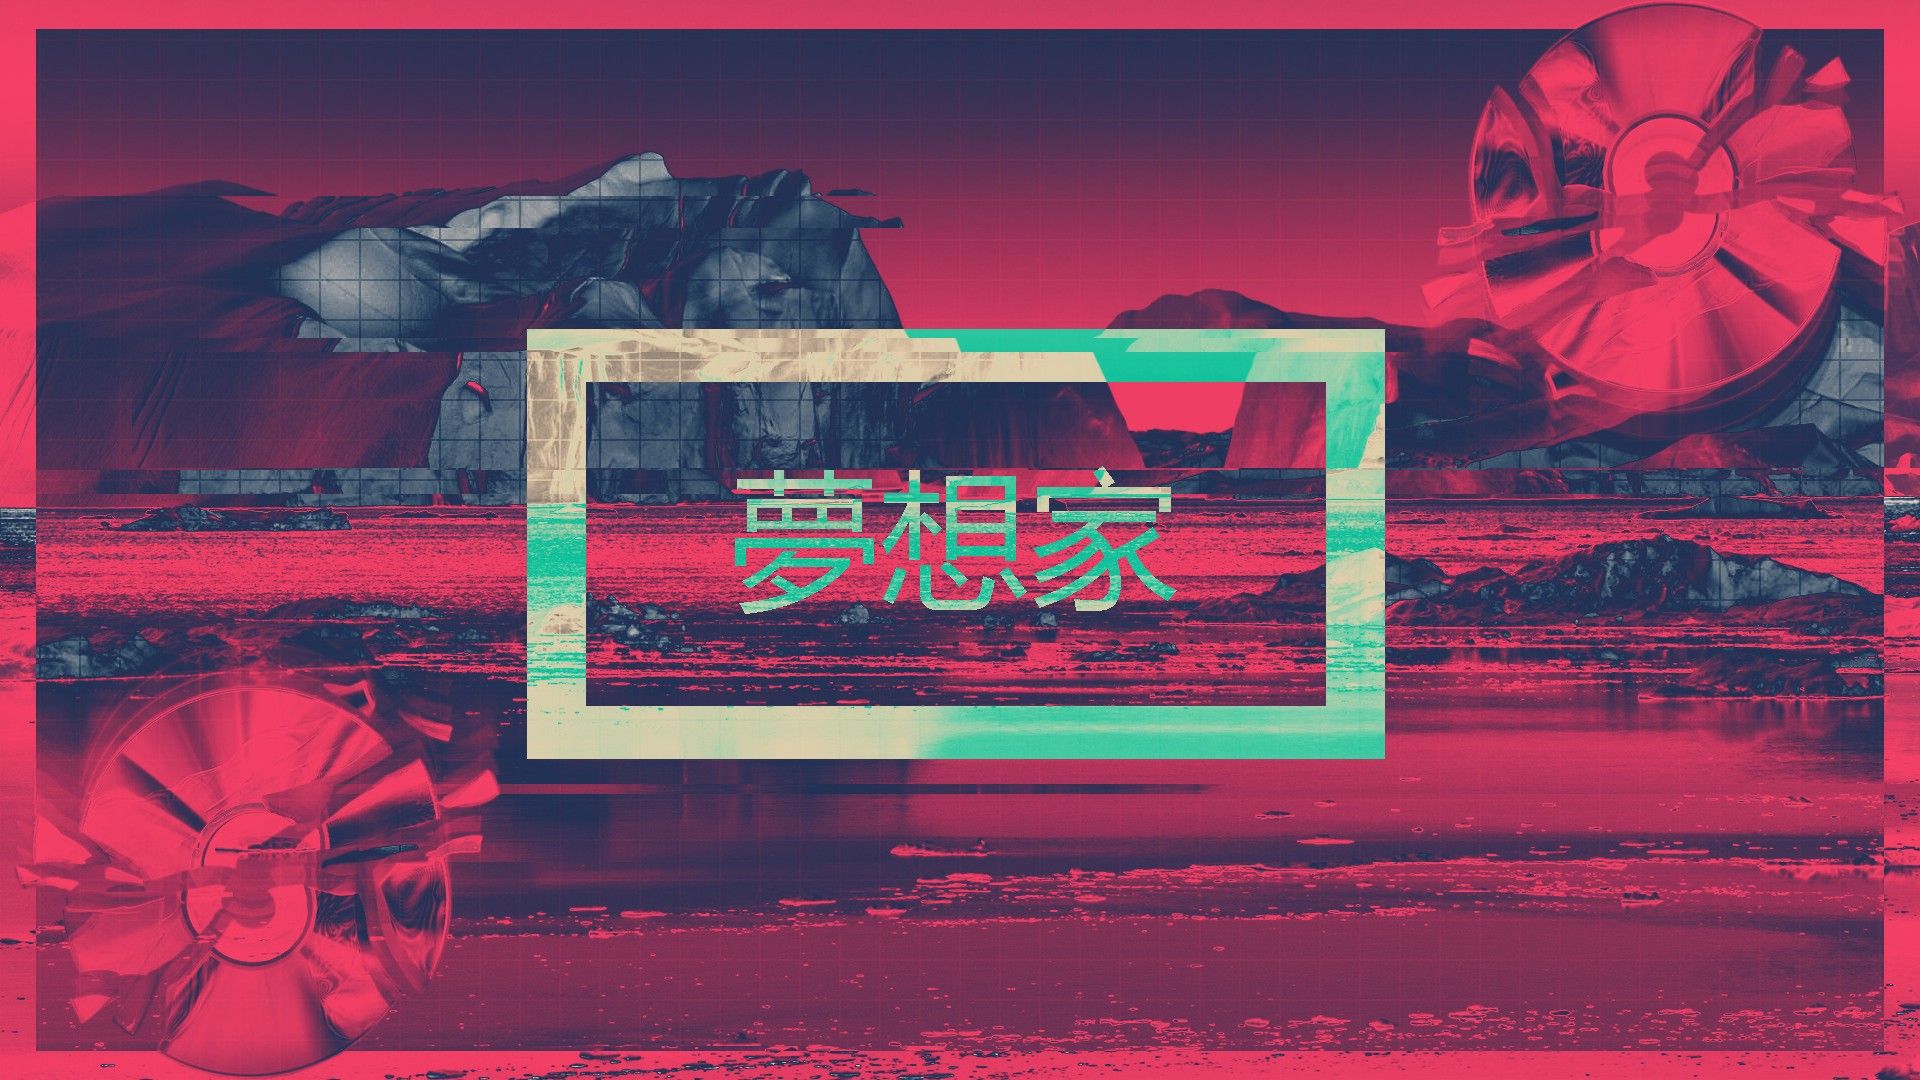 Aesthetic wallpapers hd x